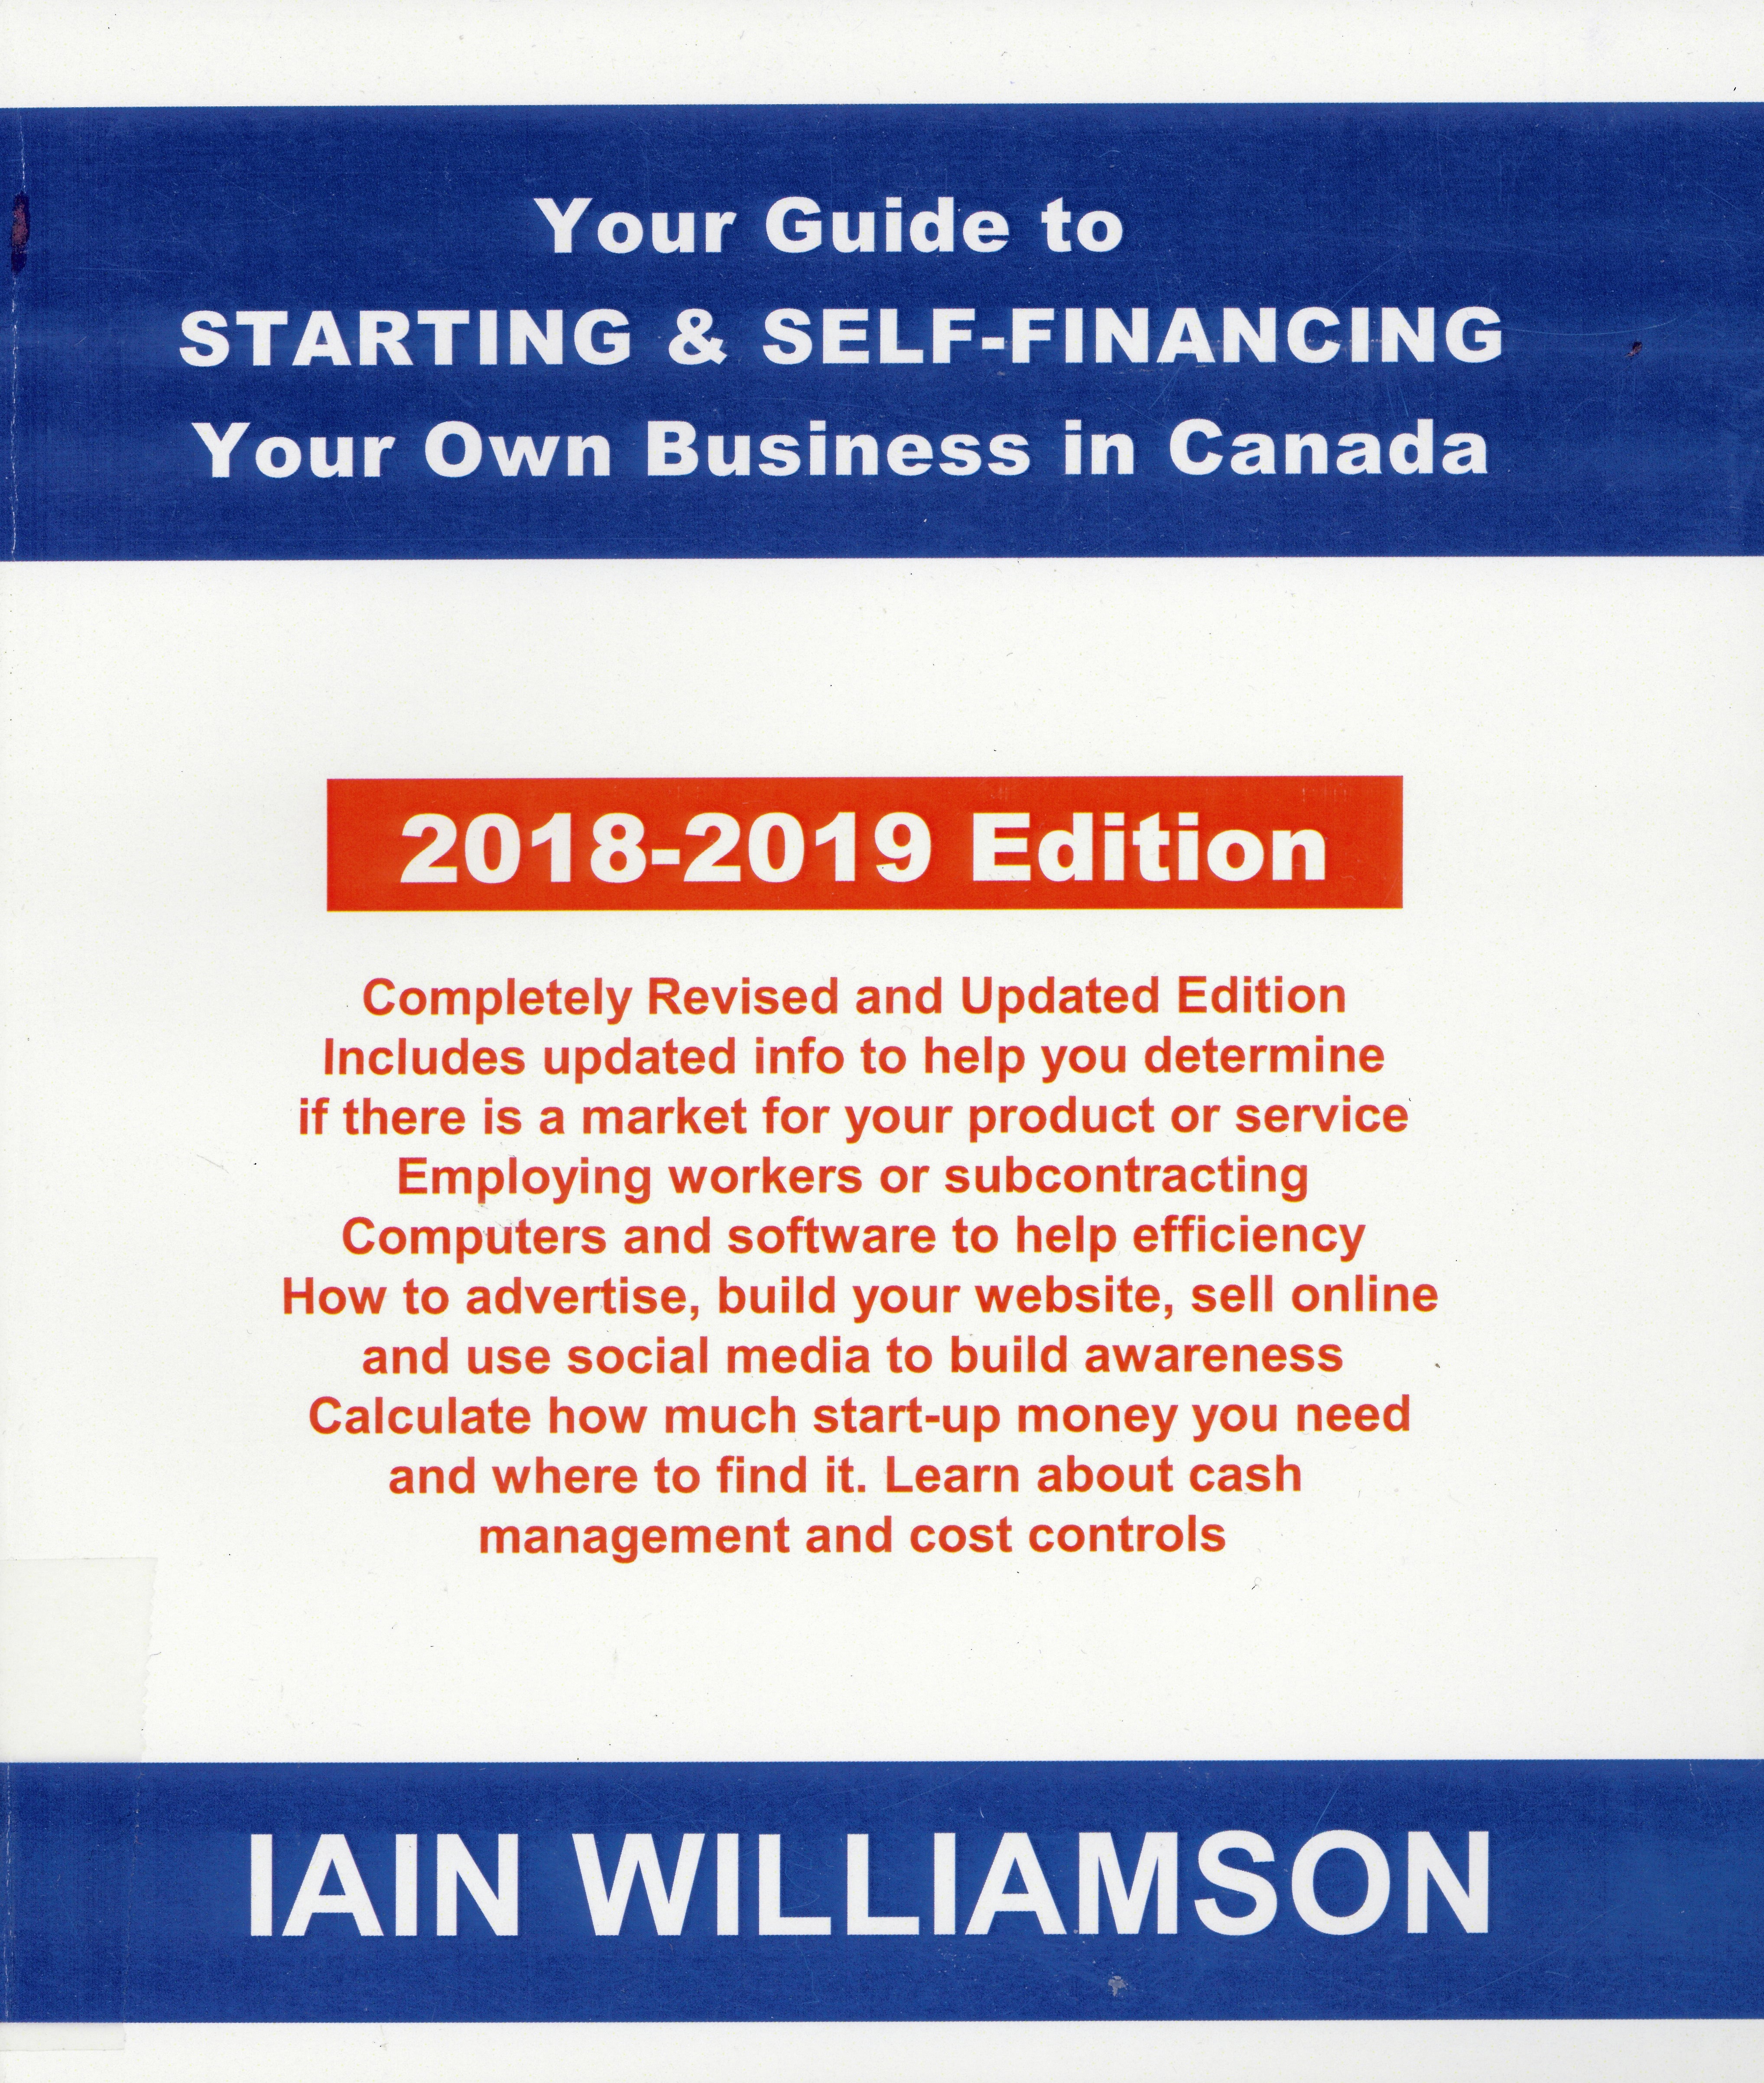 Your guide to starting and self-financing your own business in Canada